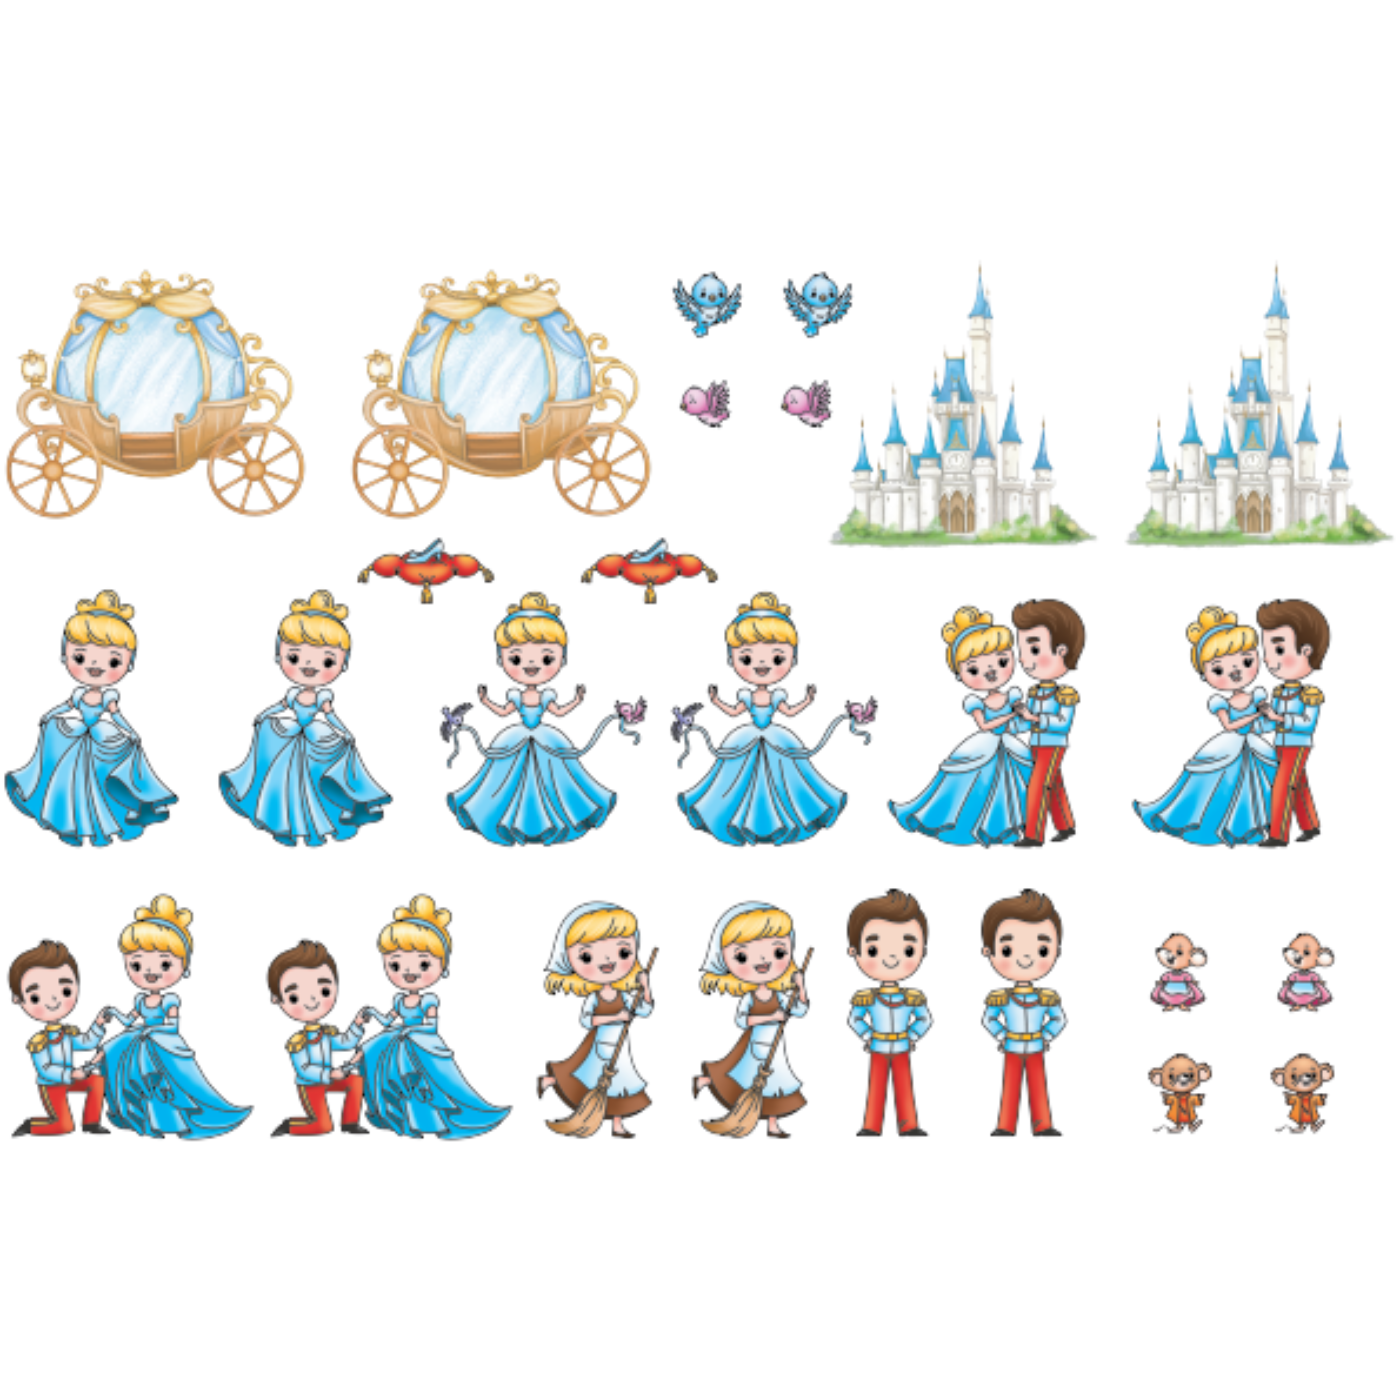 
                  
                    I Want It All Bundle - Cinderella Release Scrappy Boy Stamps
                  
                